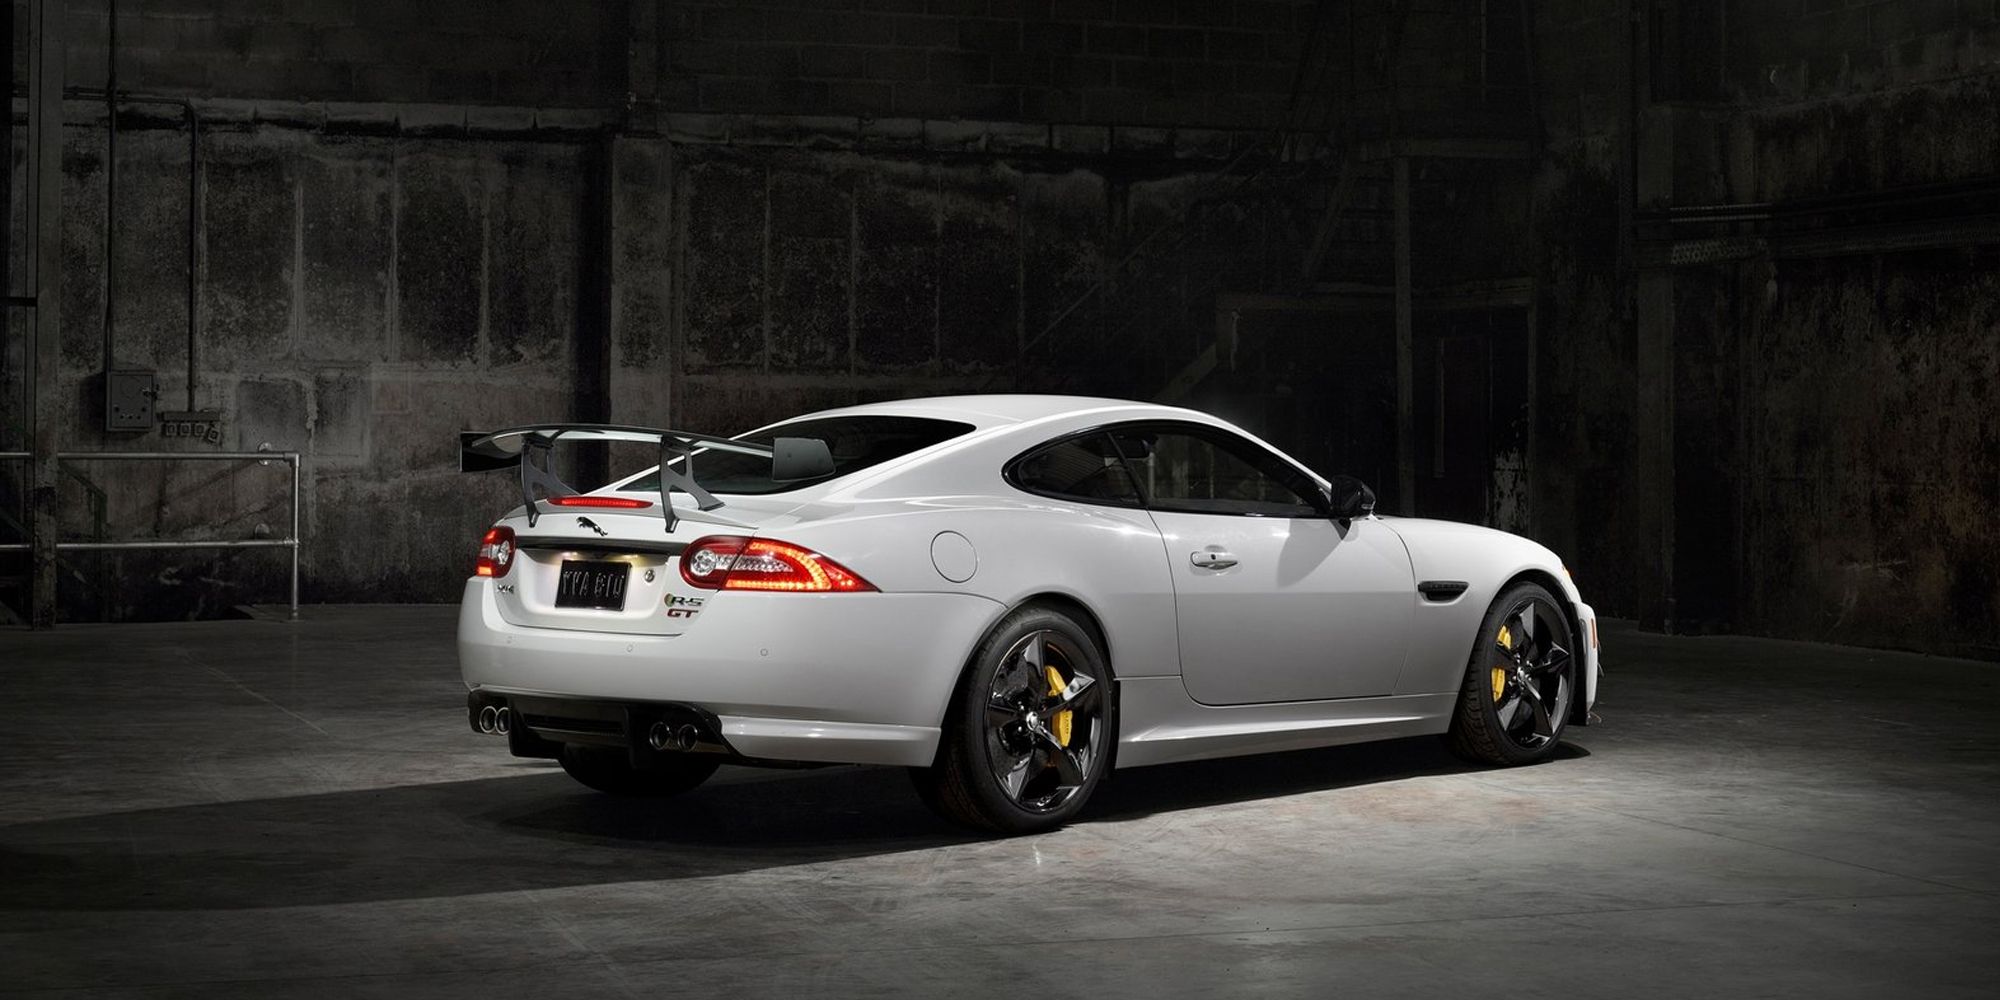 Rear 3/4 view of the XKR-S GT, studio shot